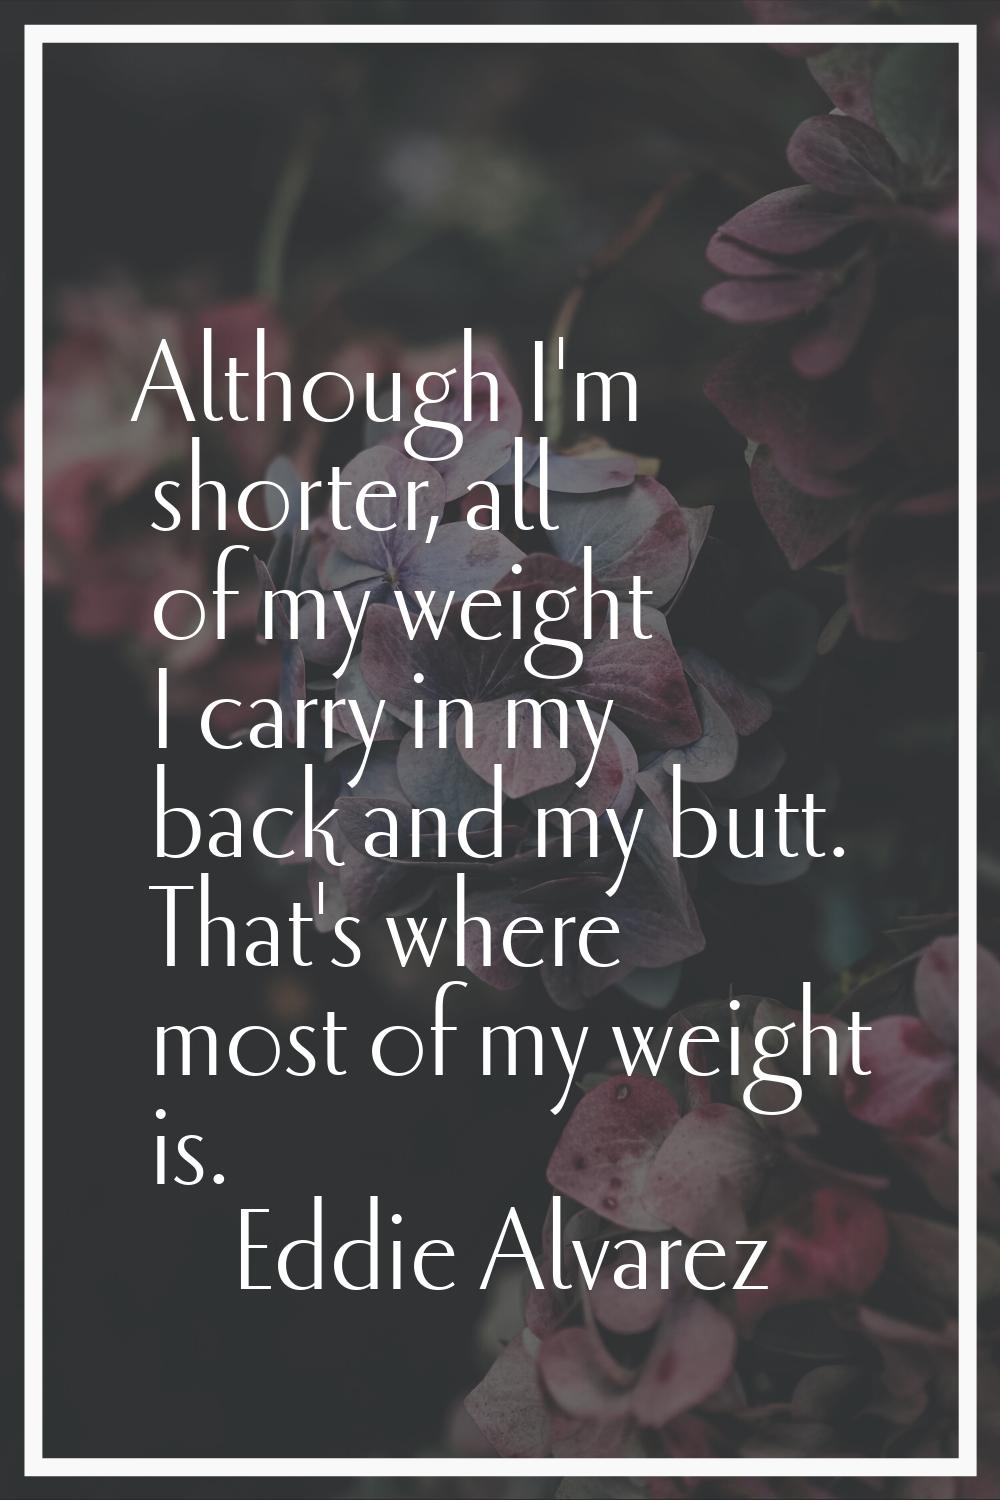 Although I'm shorter, all of my weight I carry in my back and my butt. That's where most of my weig